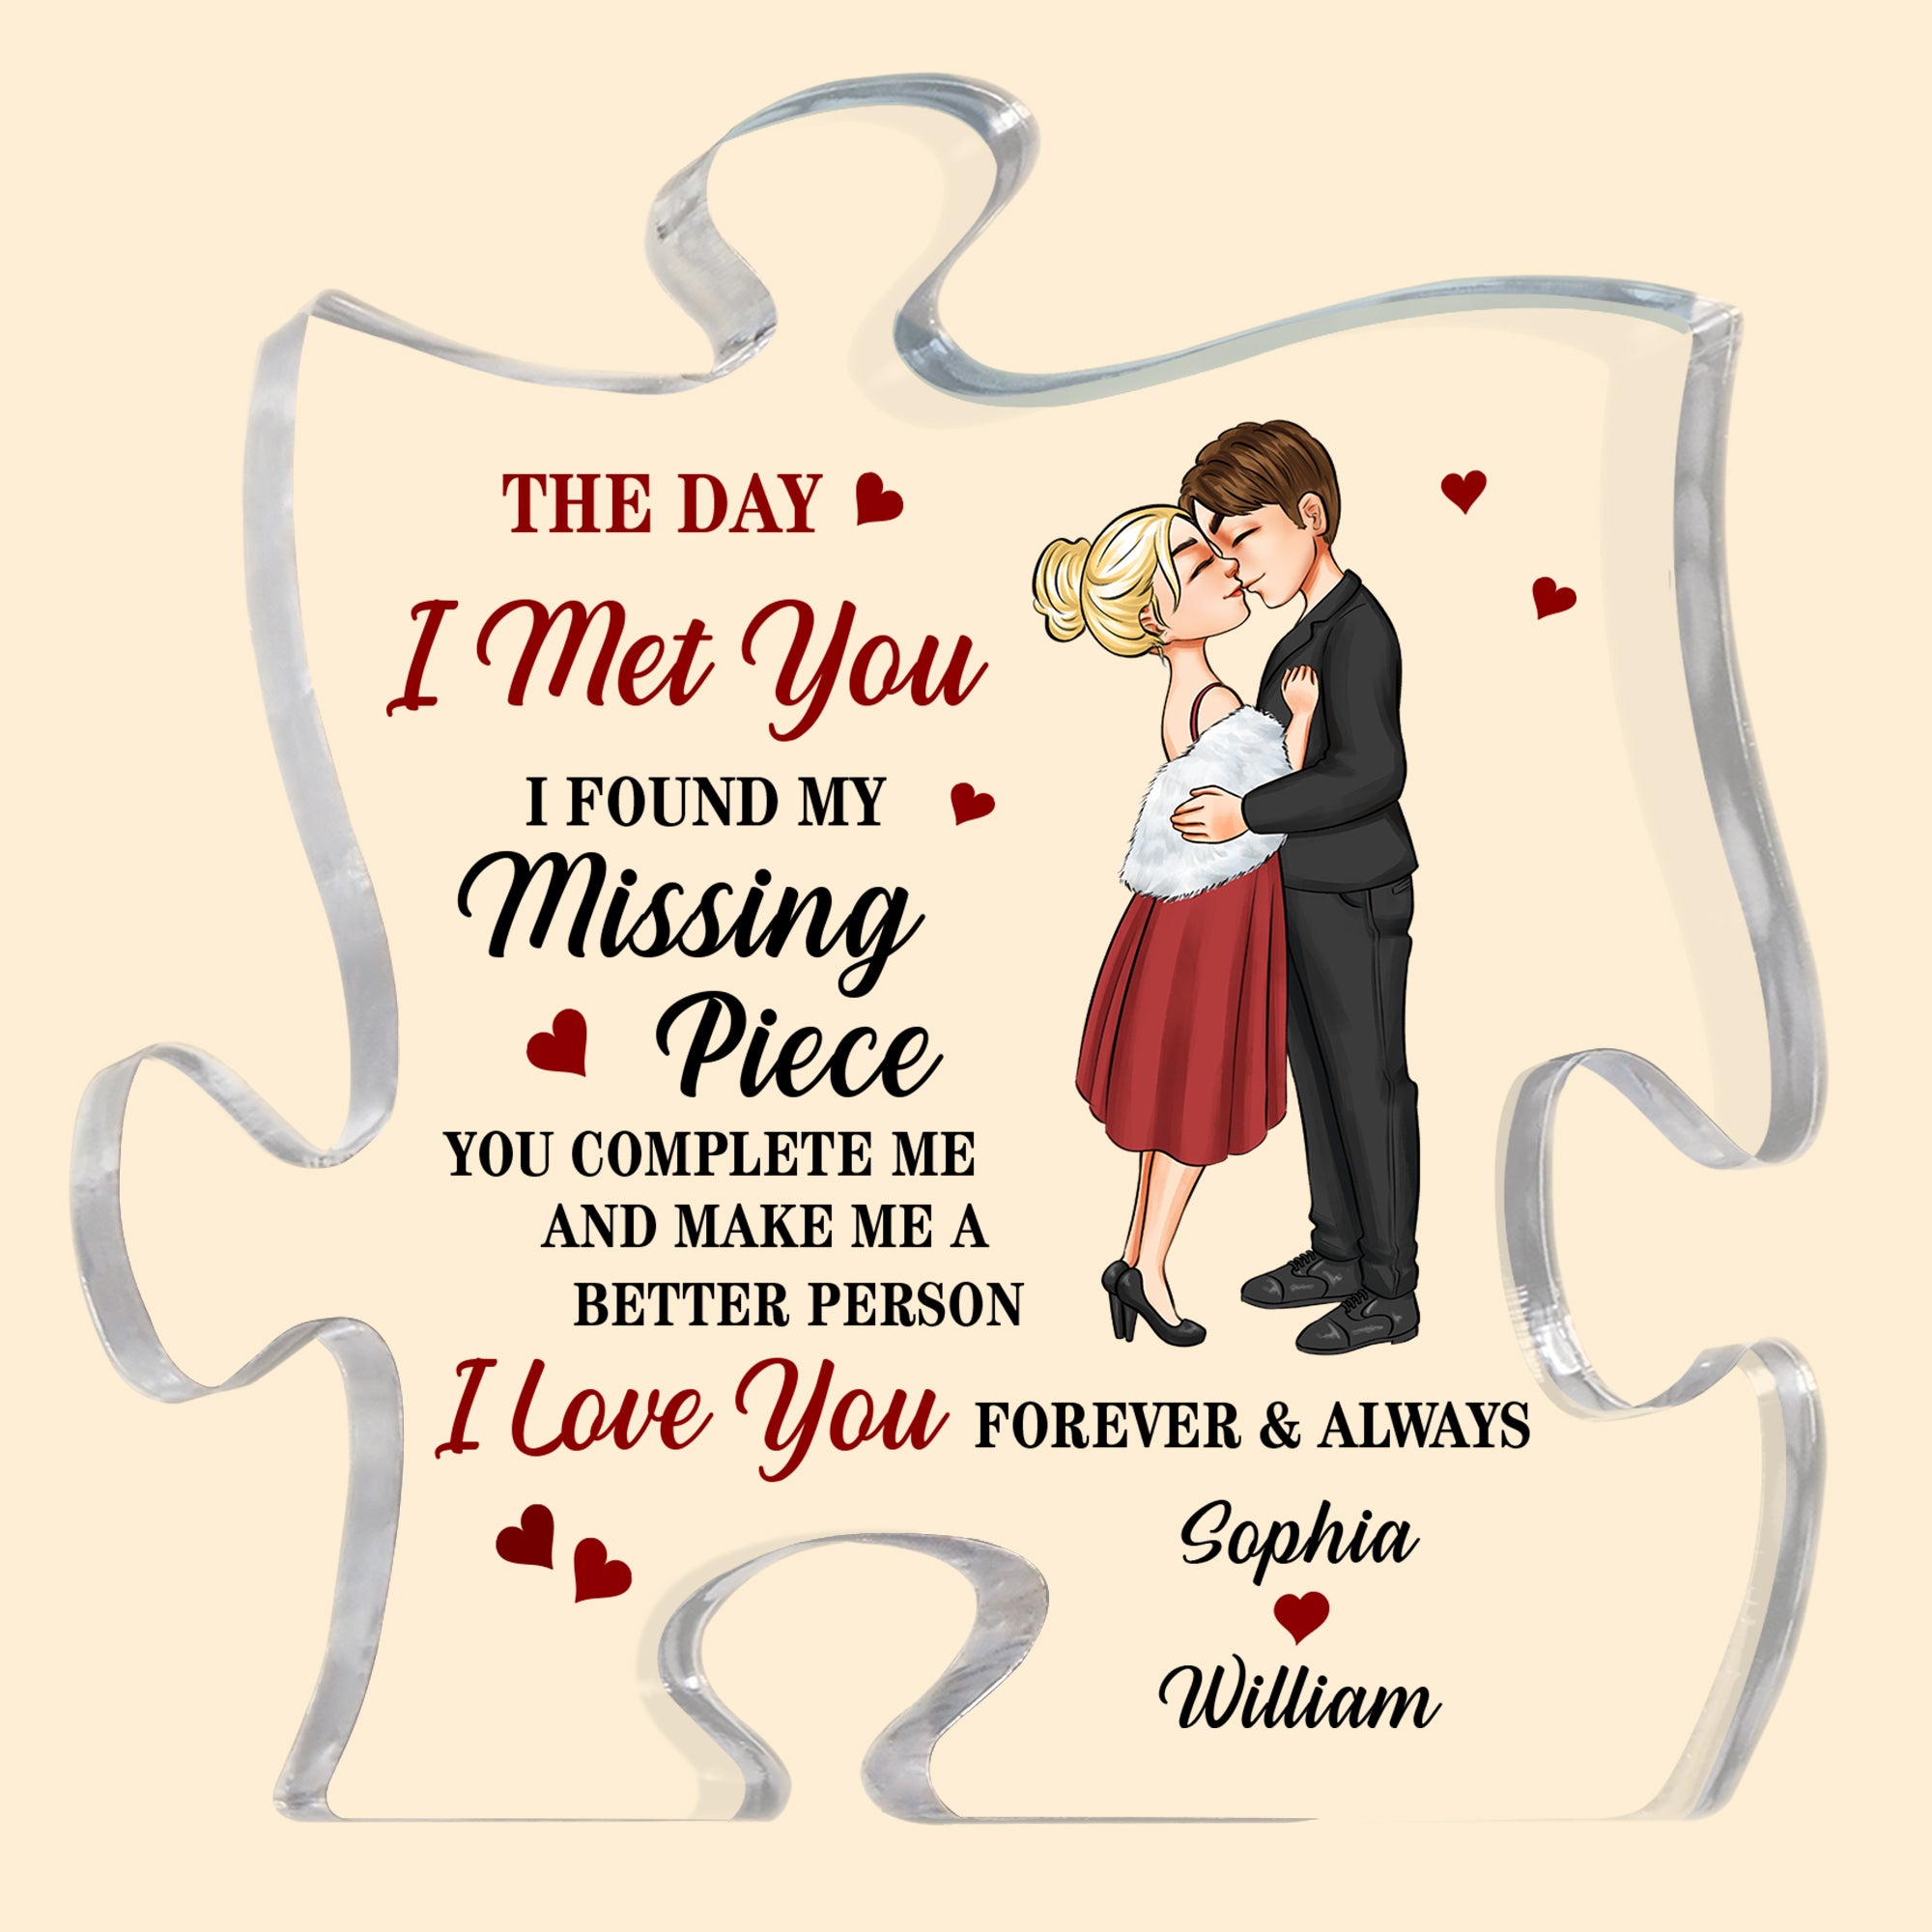 Puzzle Plaque - Our love for you will never cease You will always be our  missing piece